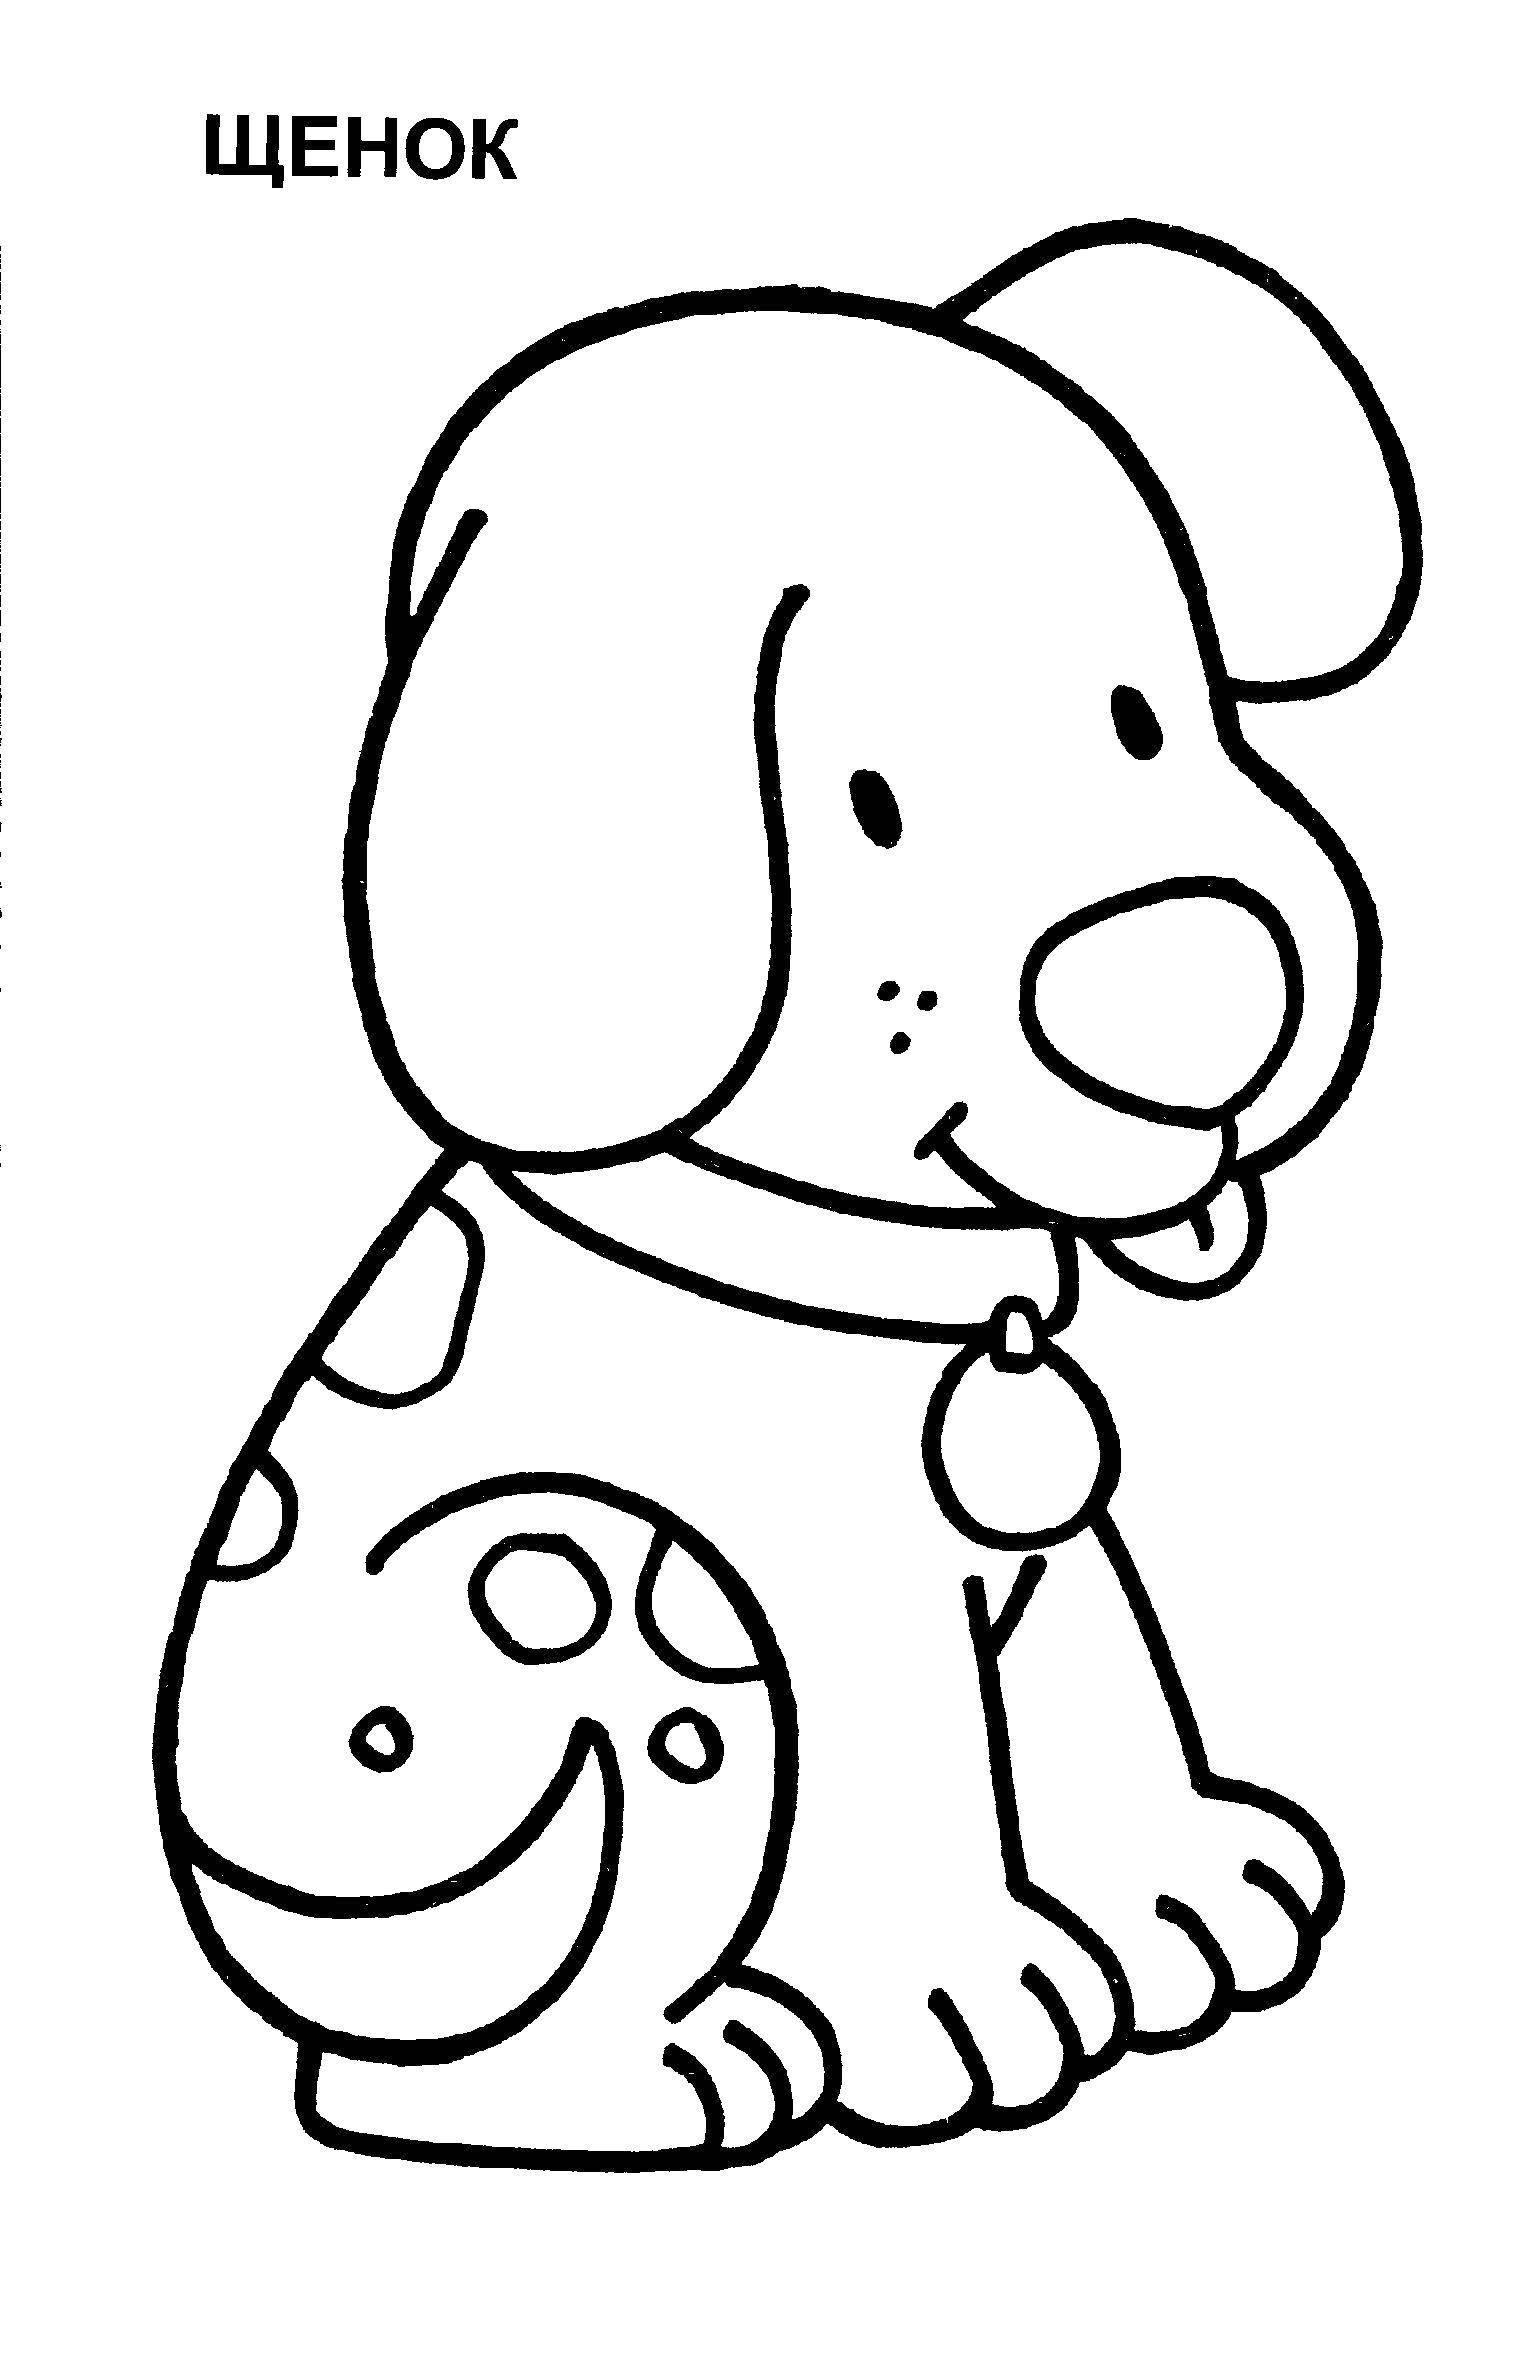 Coloring Puppy. Category Coloring pages for kids. Tags:  puppy .